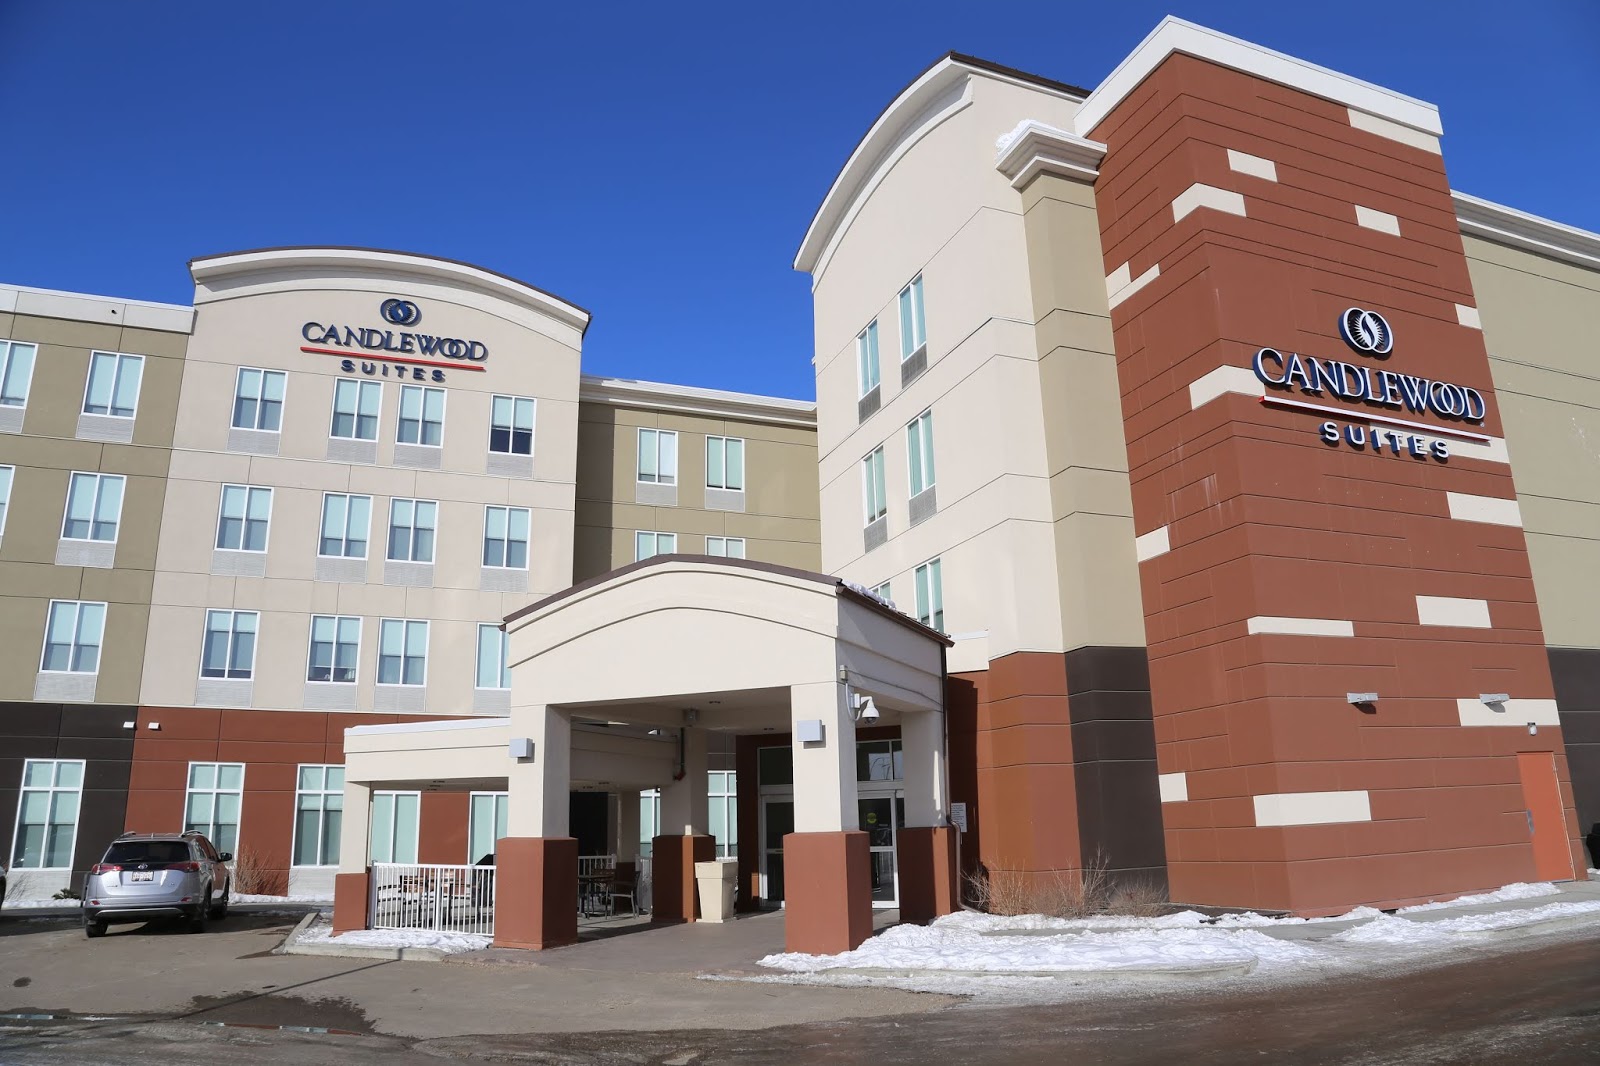 Rewards Canada Hotel Review Candlewood Suites West Edmonton Mall Area